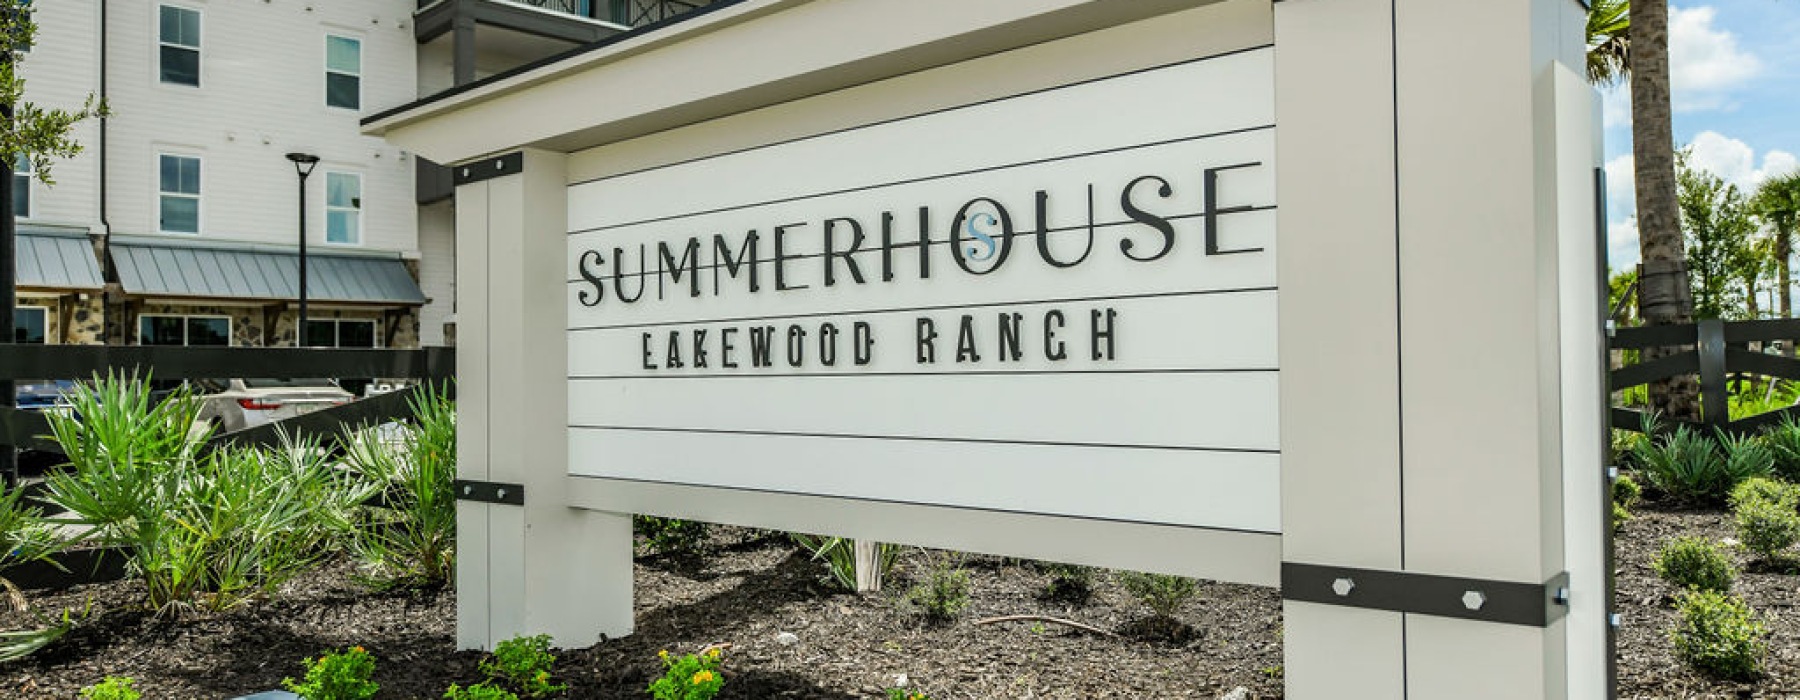 Summerhouse at Lakewood Ranch welcome sign 